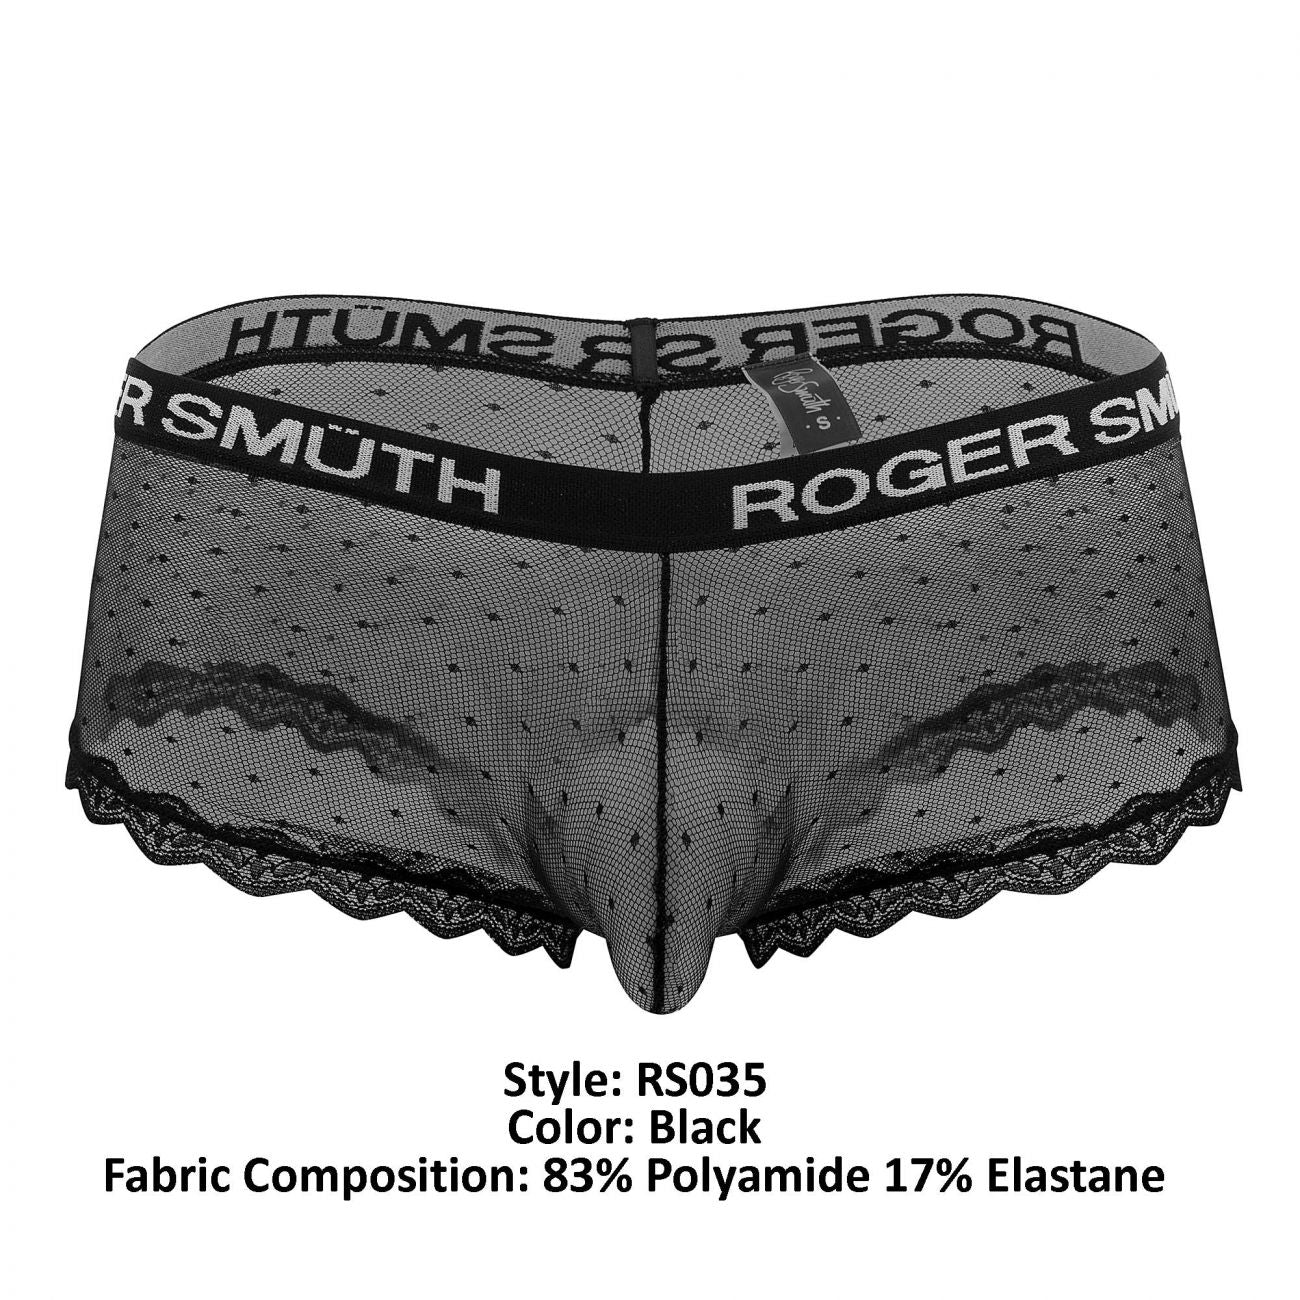 Roger Smuth Trunks